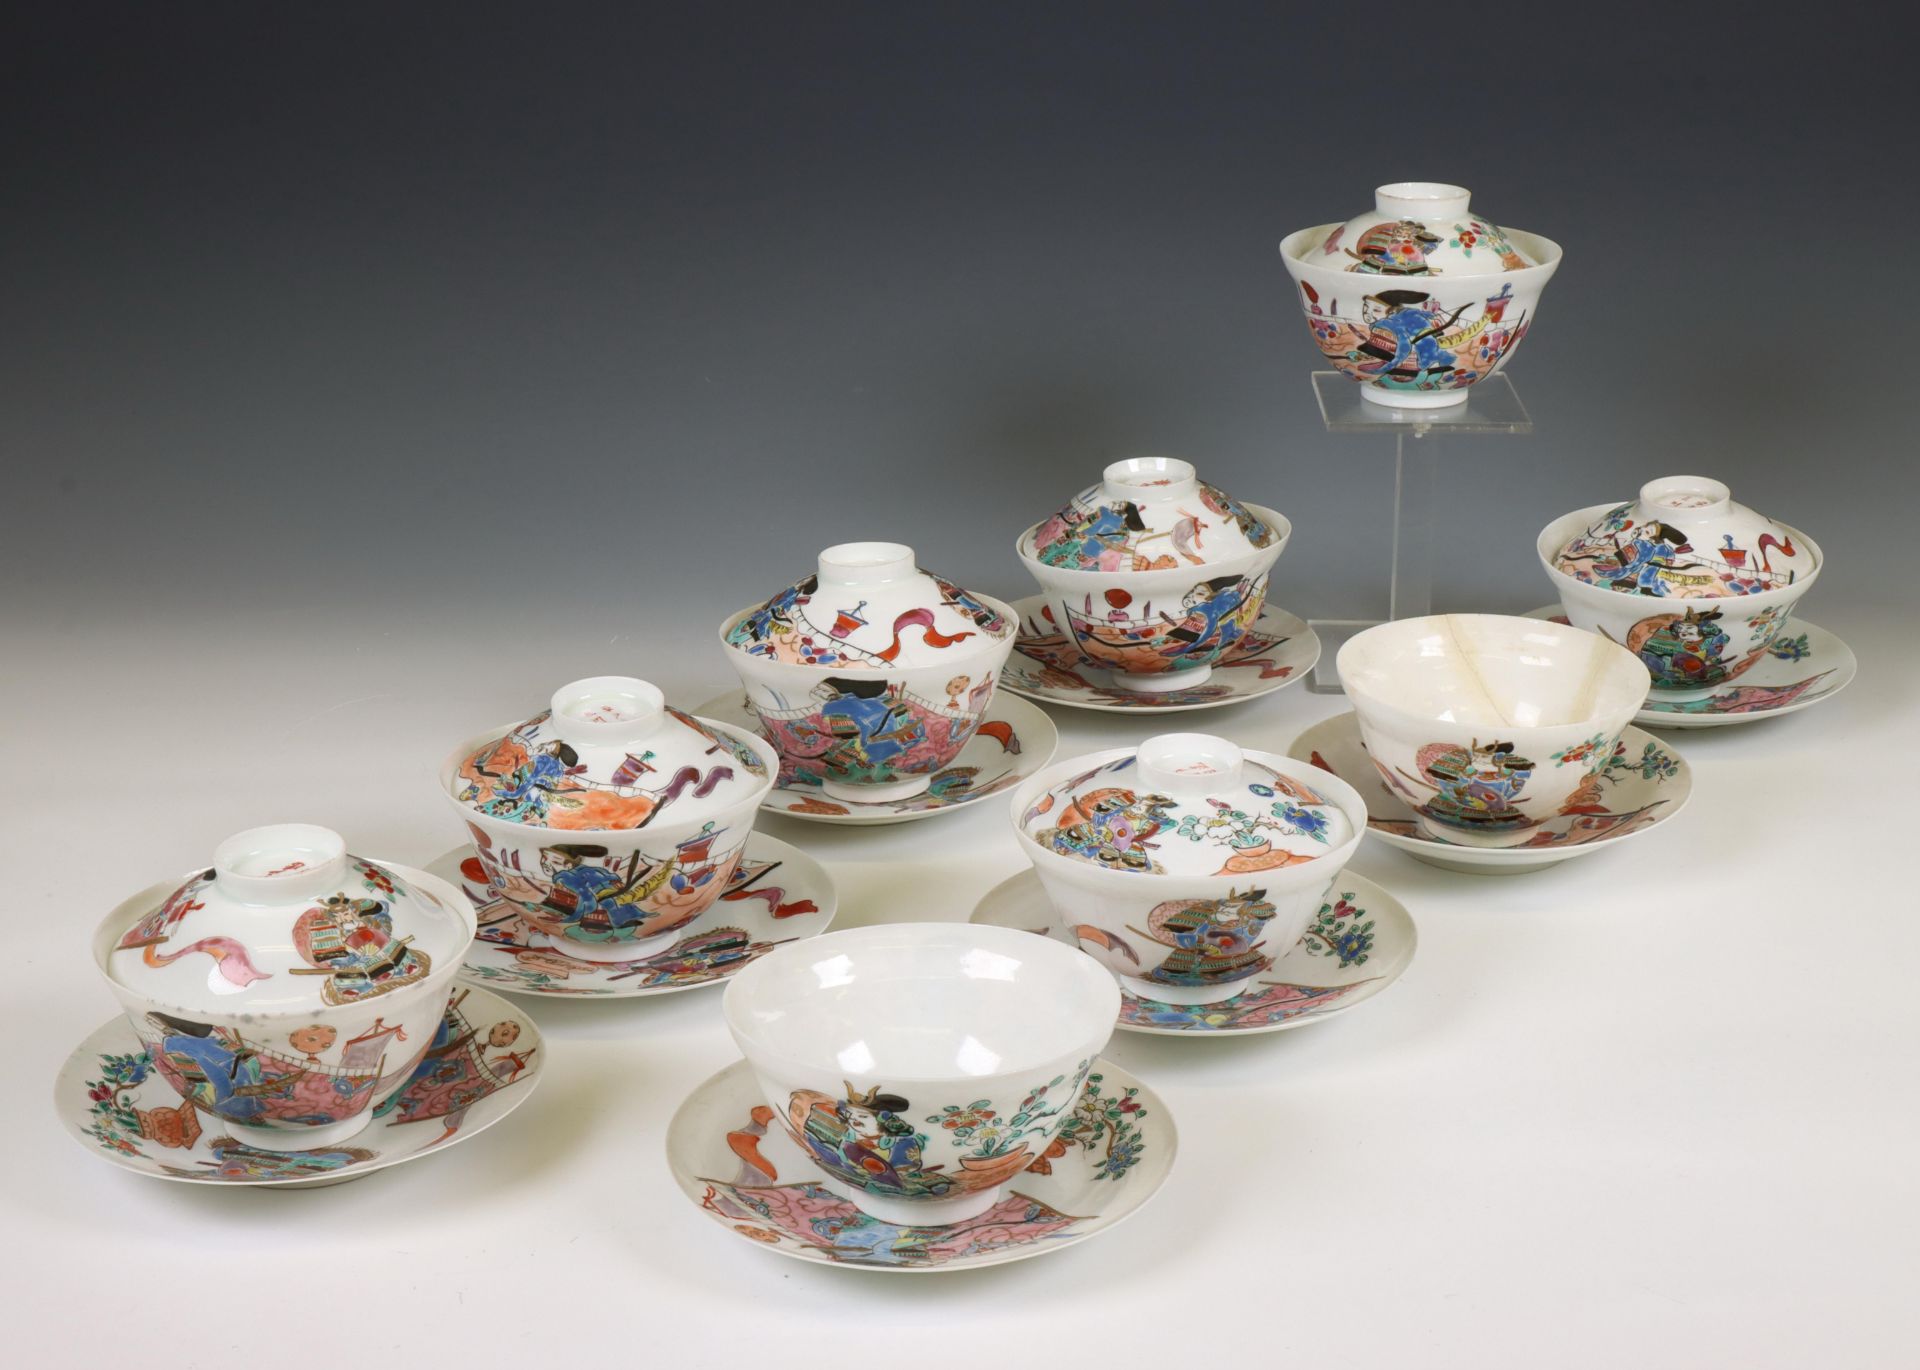 Japan, a polychrome porcelain collection of cups and saucers, 20th century,